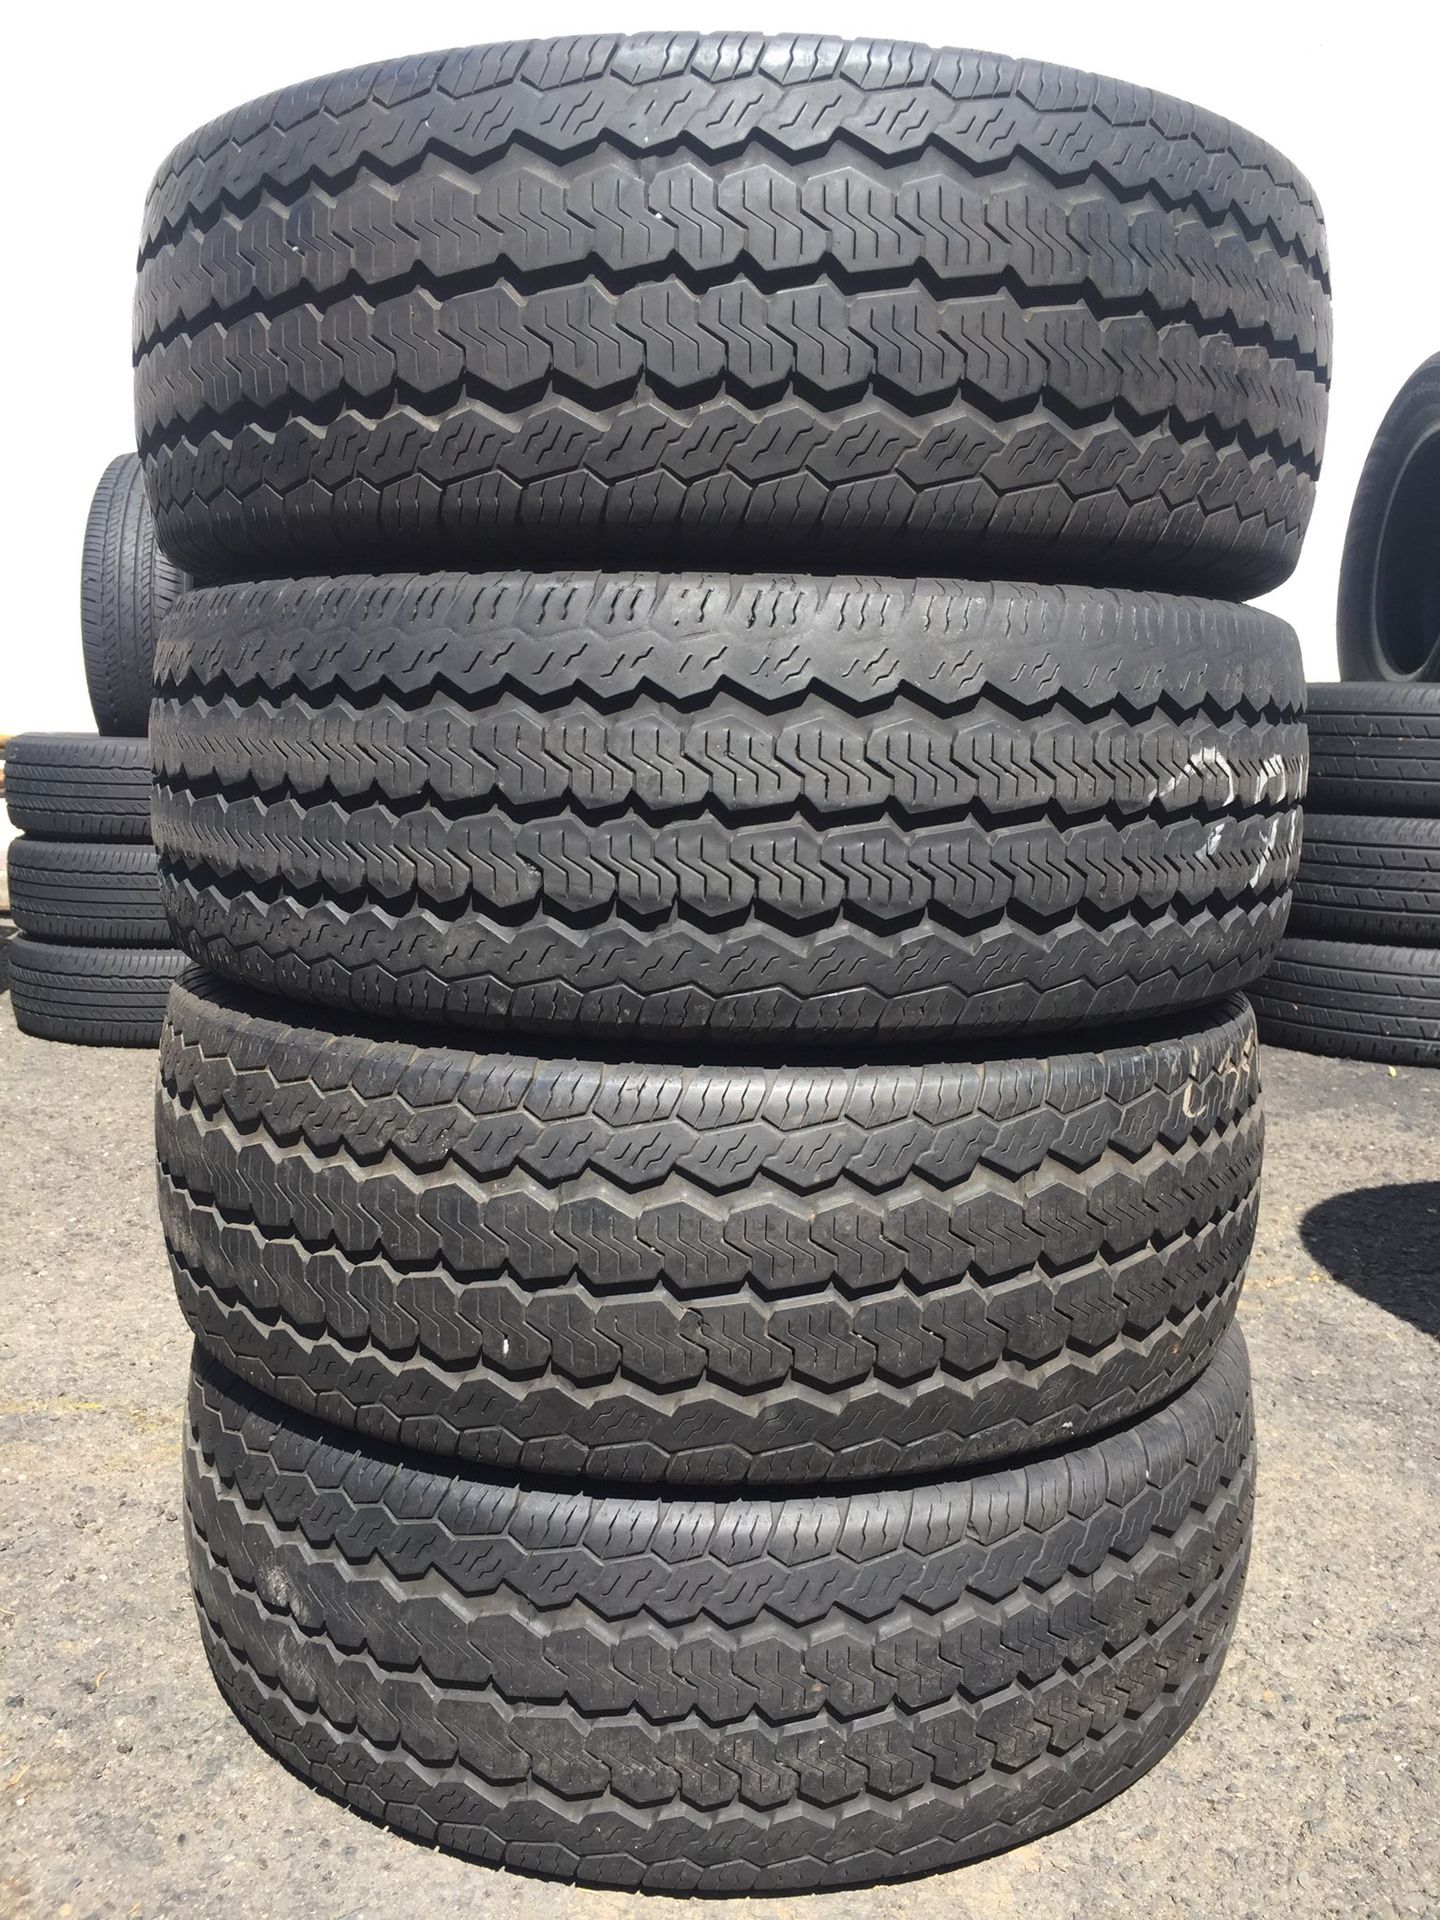 235/65/16 C Continental set of used tires in great condition 70% tread 185$ for 4 . Installation balance and alignment available. Road force balance